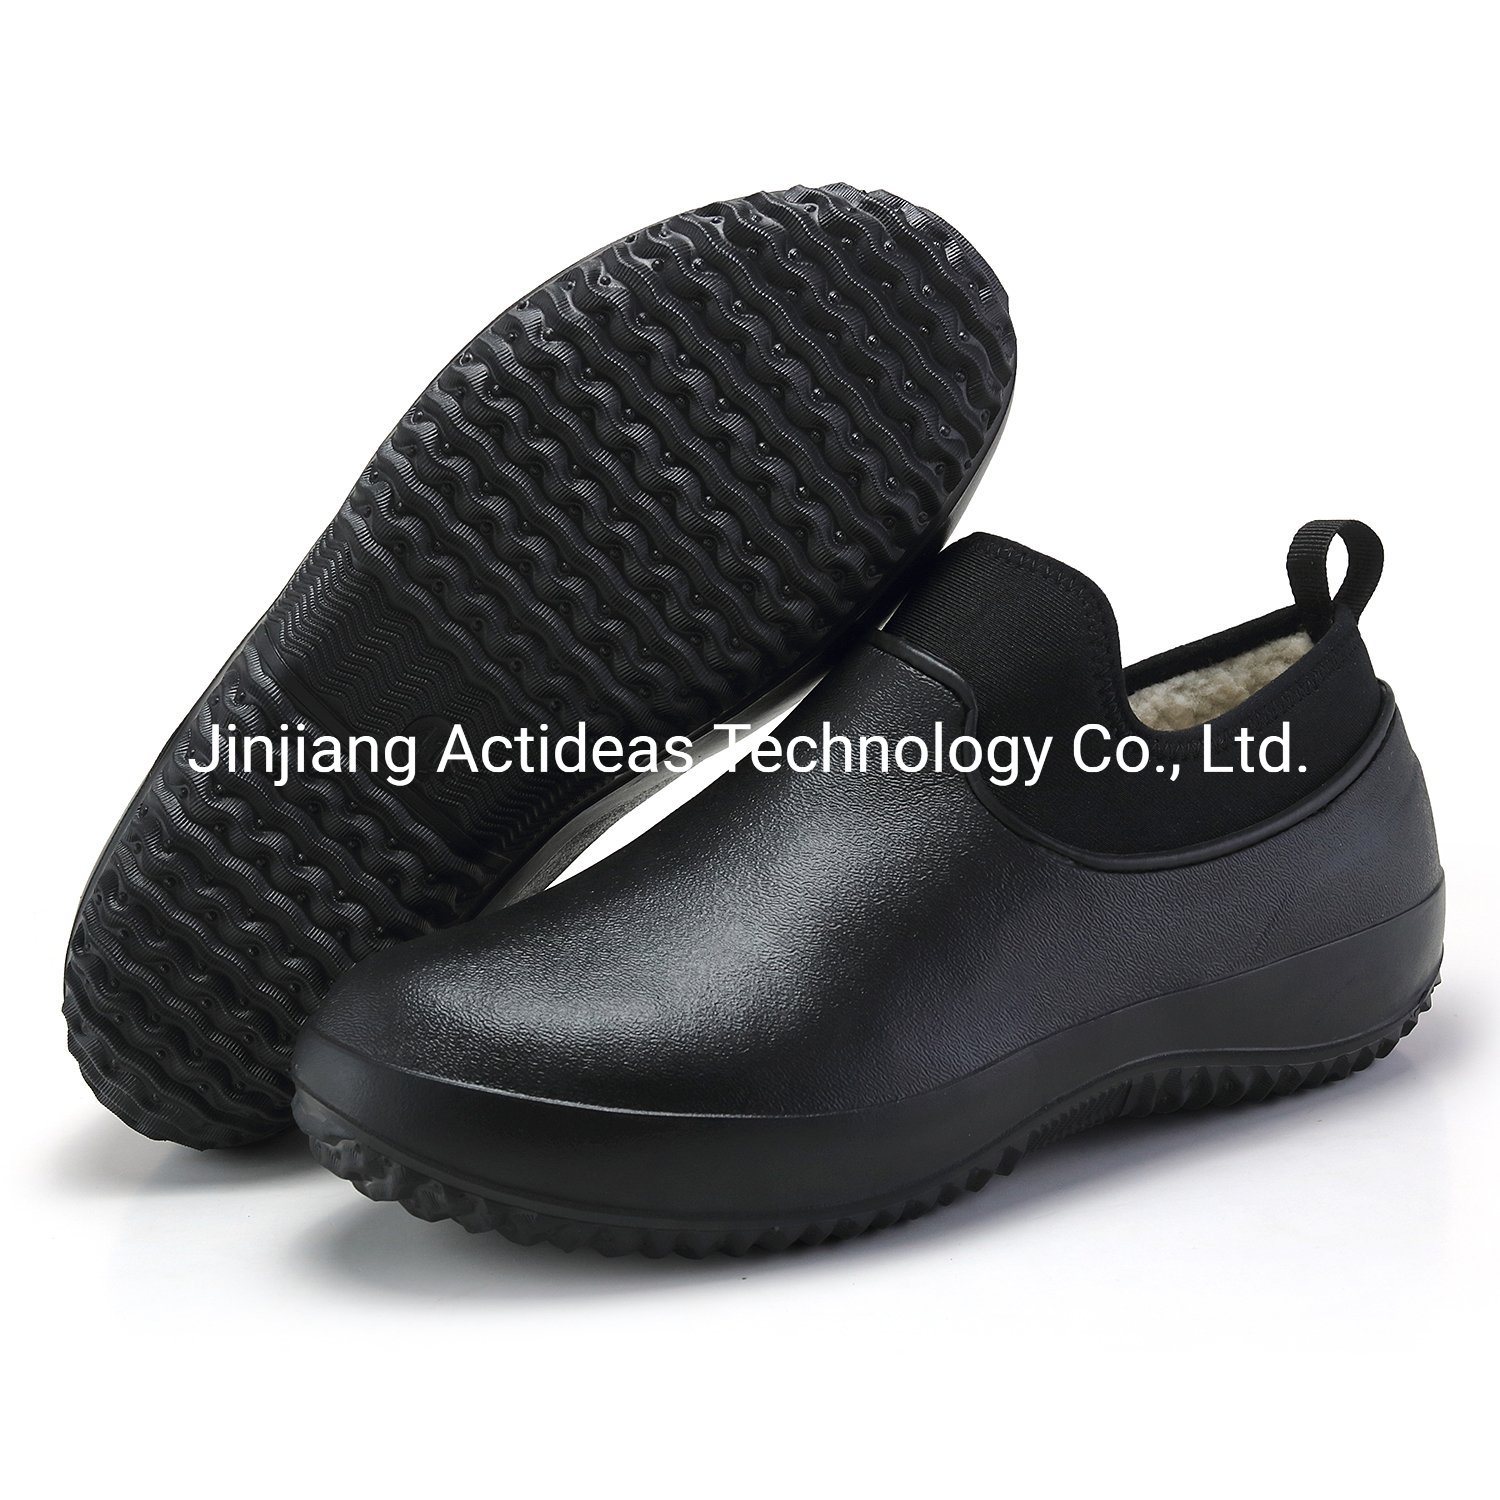 2021 New High Quality Winter Shoes Leather Footwear Sneaker Shoes